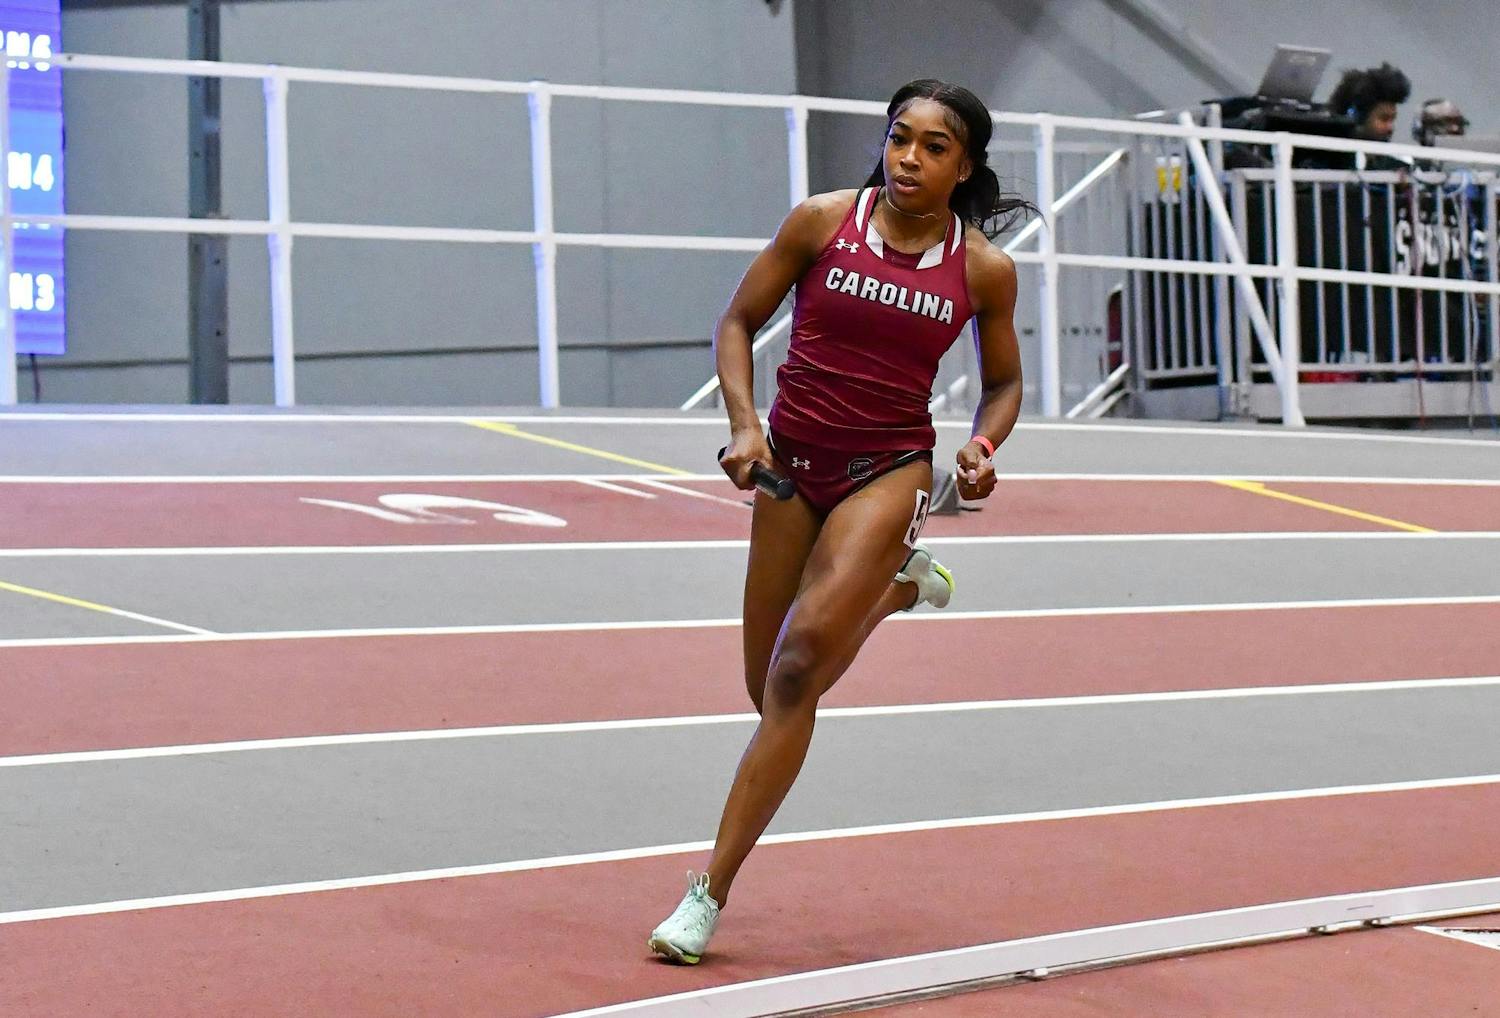 JaMeesia Ford running at the Carolina Indoor Track &amp; Field Complex during the Gamecock Opener on Jan. 13, 2024. Ford, a freshman sprinter, is the 2024 SEC Freshman Runner of the Year.